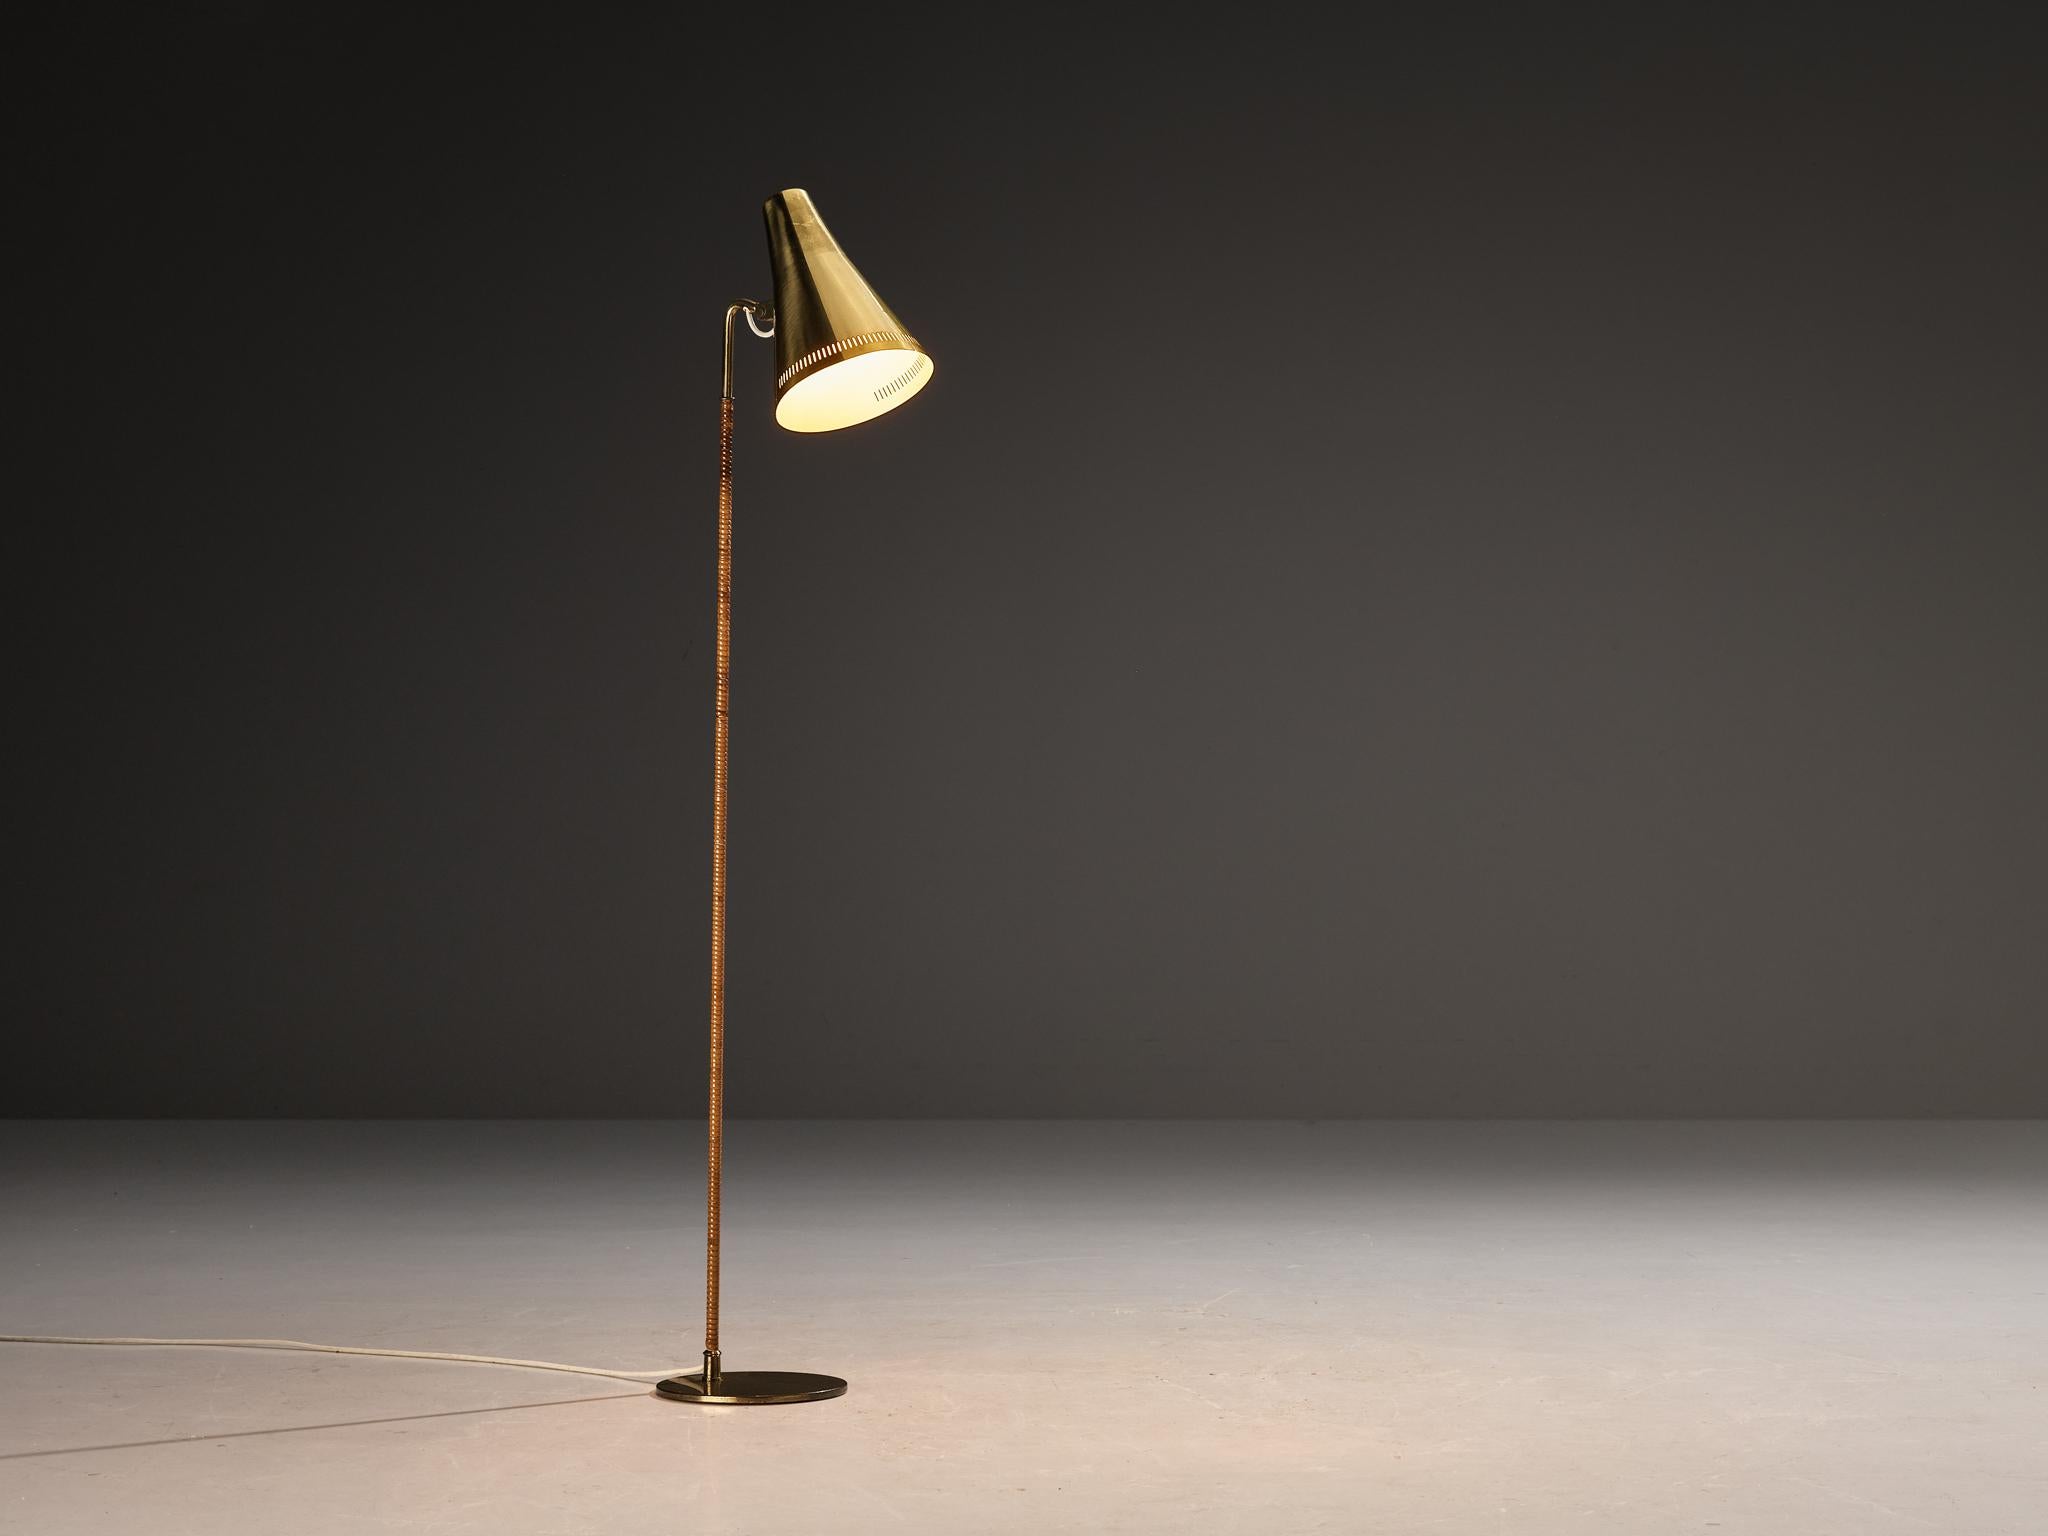 Paavo Tynell for Taito Oy, floor lamp, model 'K10', coated aluminum, brass, cane, Finland, 1950s 
 
Outstanding floor lamp designed by Paavo Tynell, the Finnish design master of lighting. This delicate floor lamp has a few distinct features. The